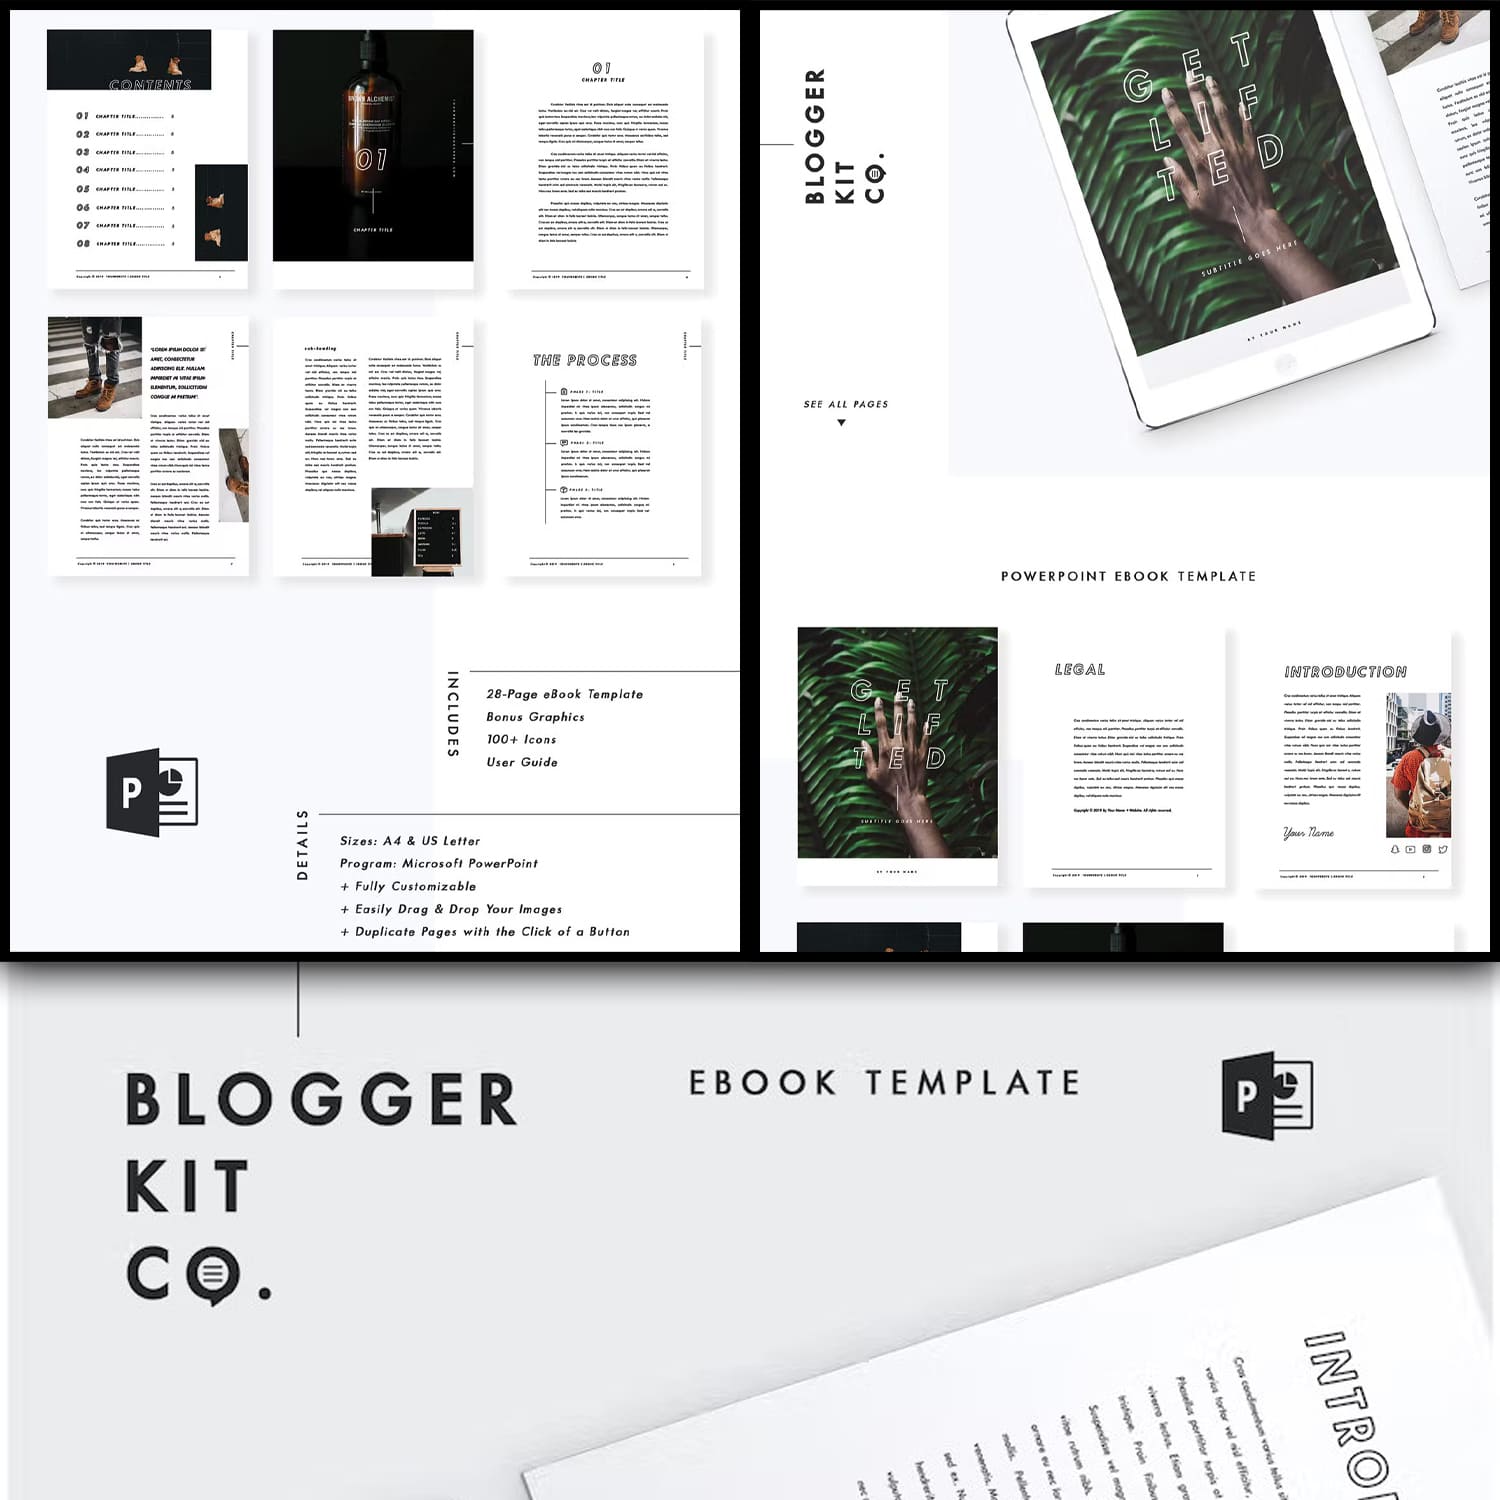 Ebook template 28 pages, picture for powerpoint 1500x1500.